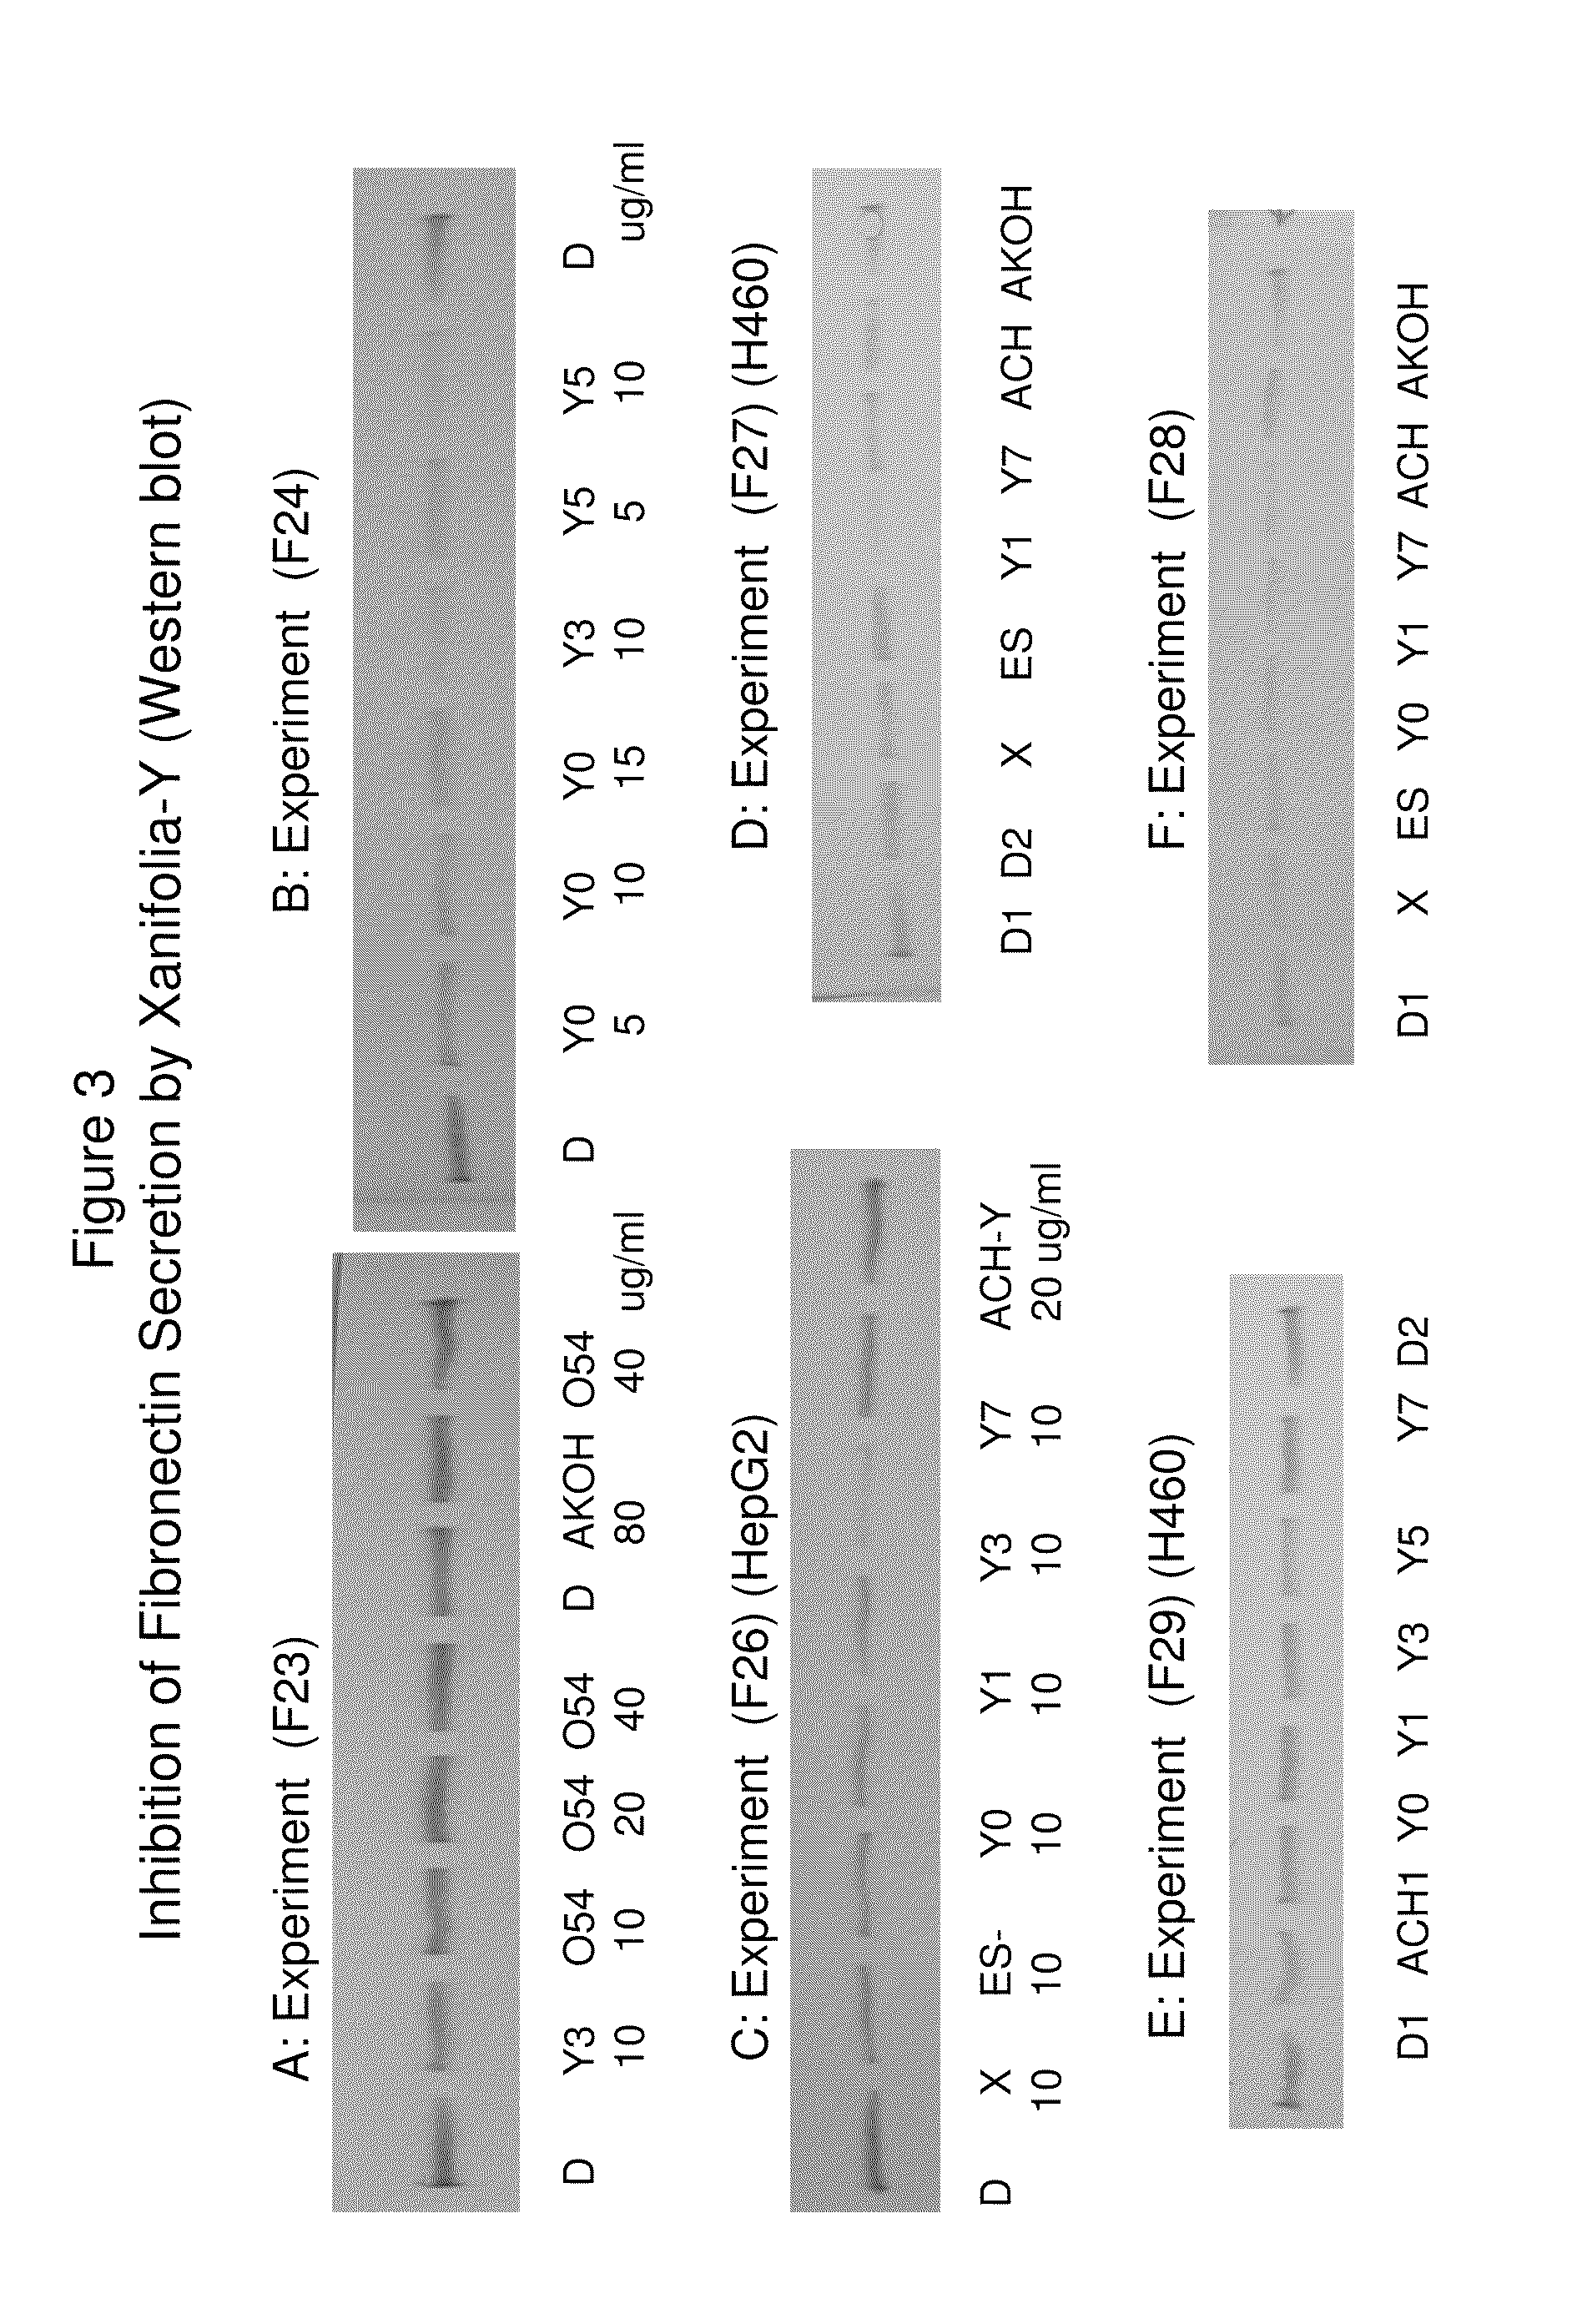 Blocking the migration or metastasis of cancer cells by affecting adhesion proteins and the uses of new compounds thereof